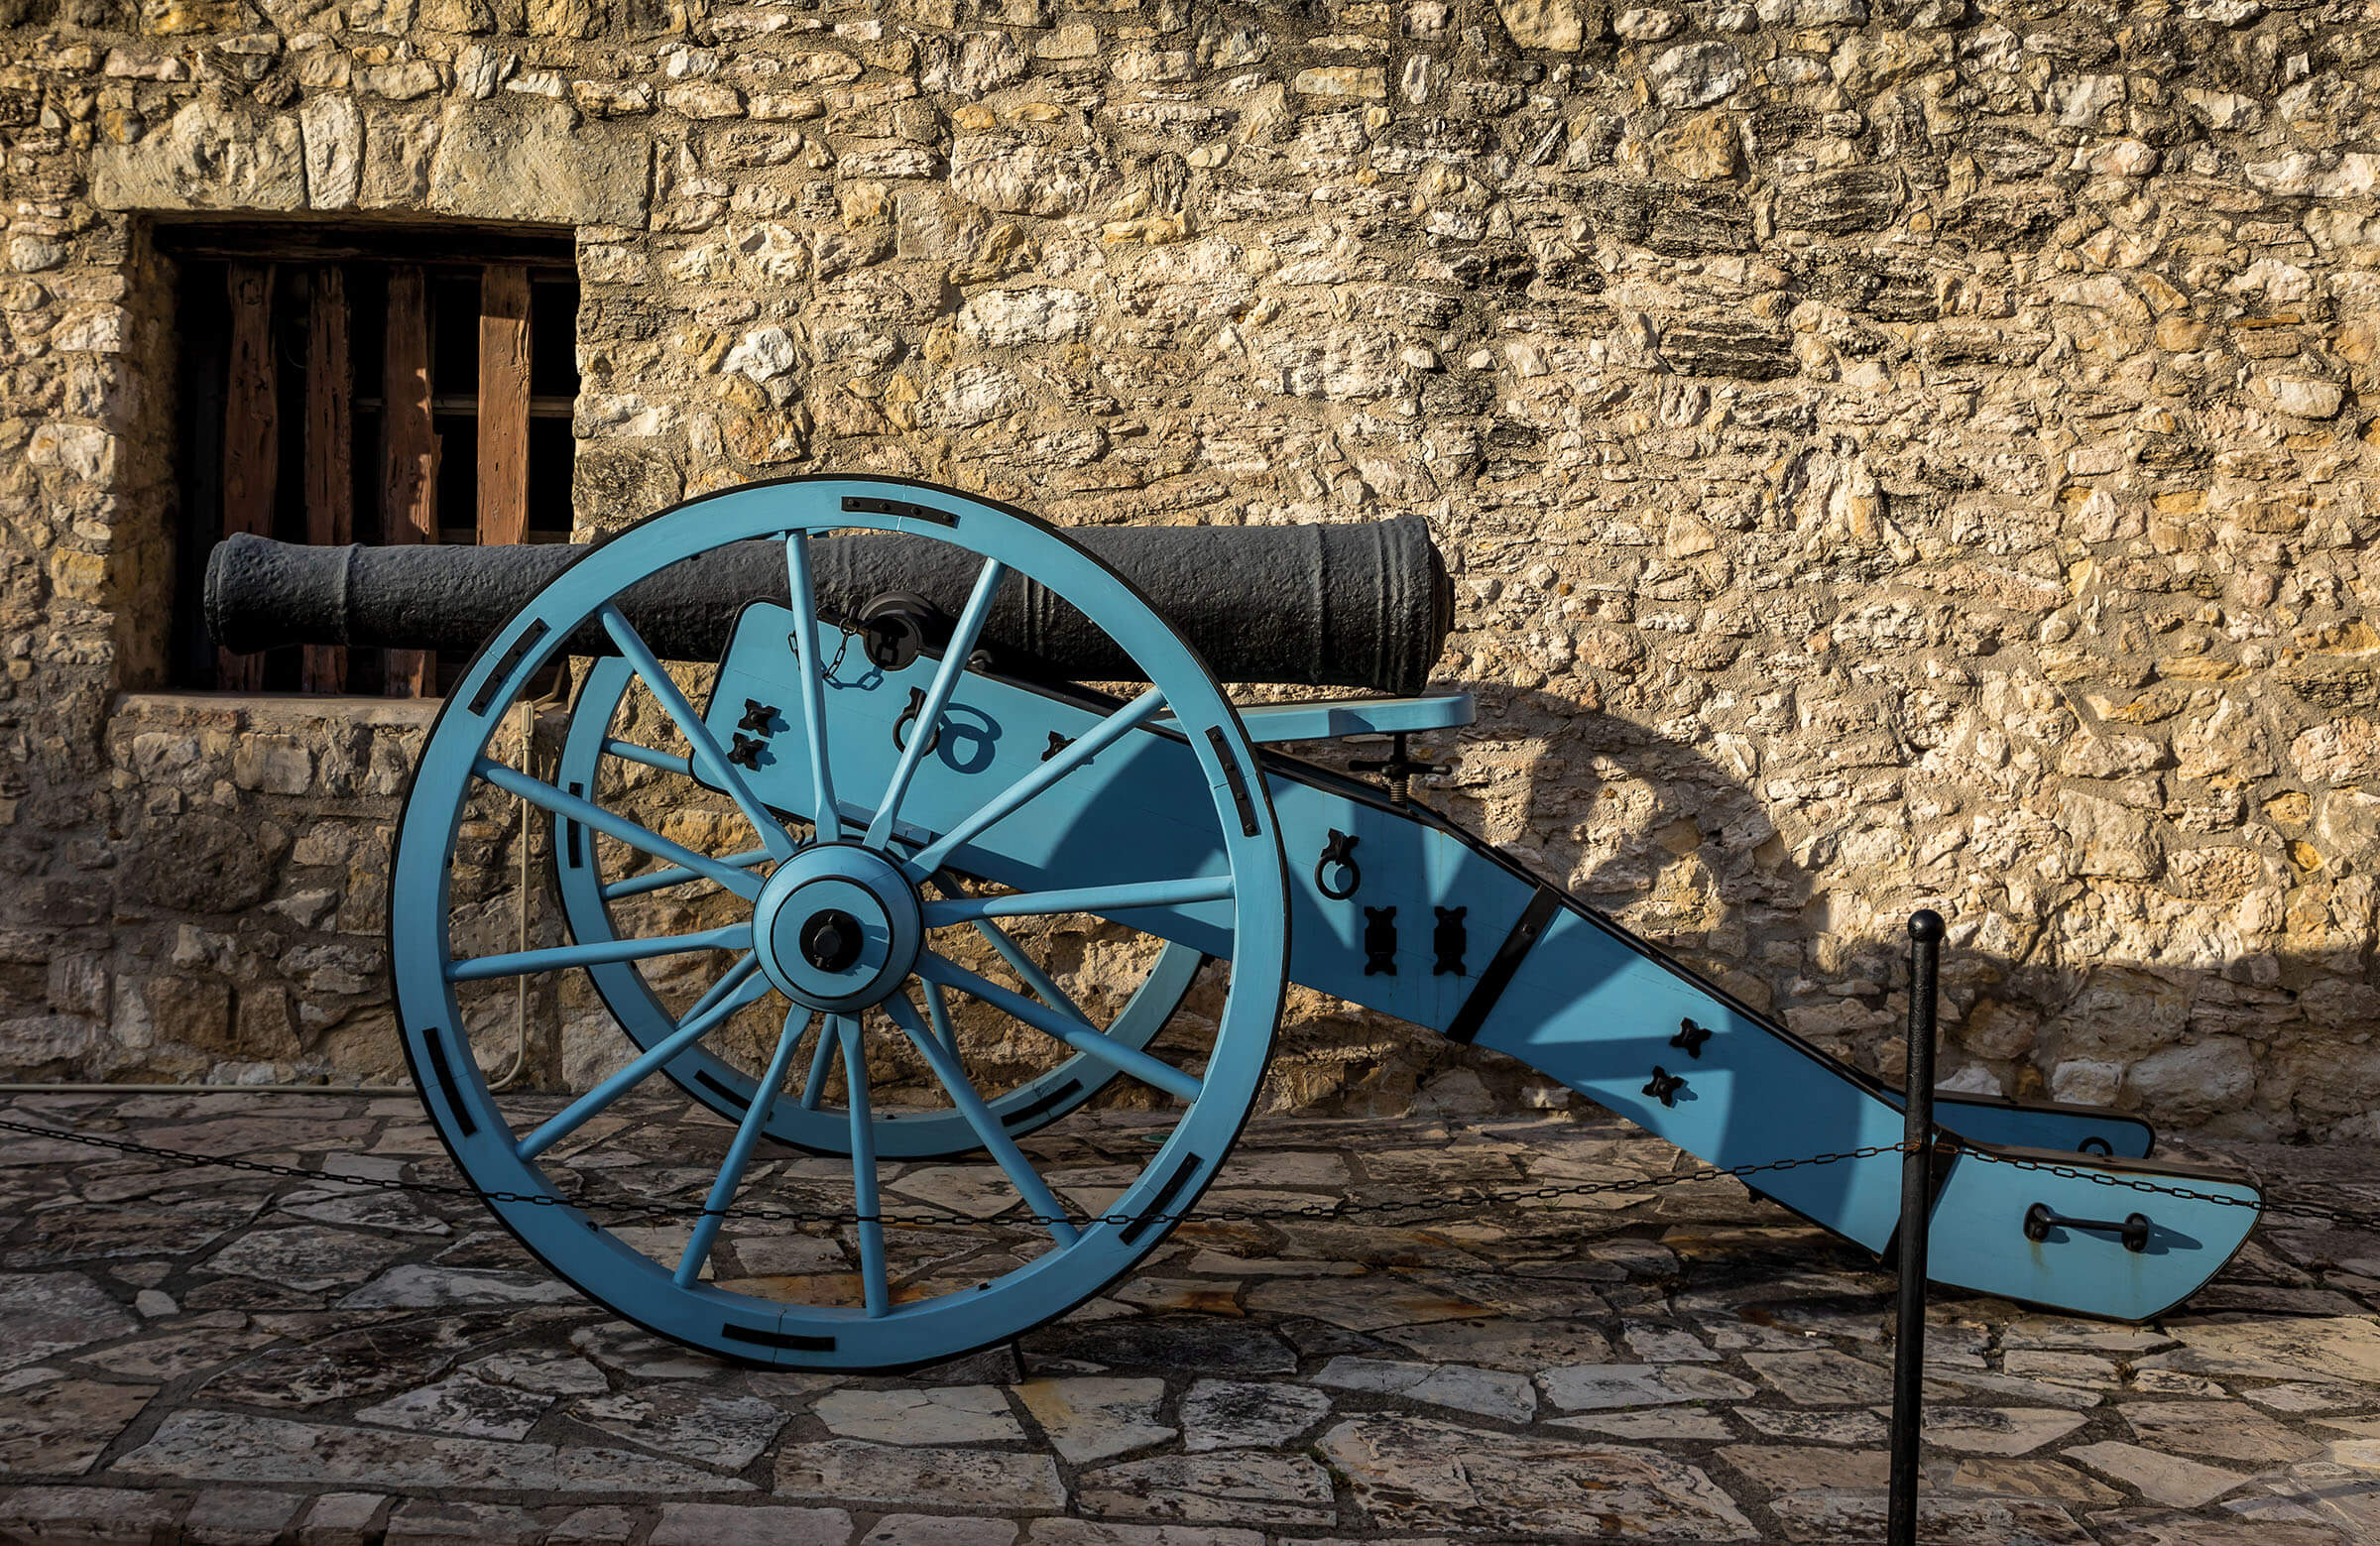 A turquoise cannon in front of a stone wall